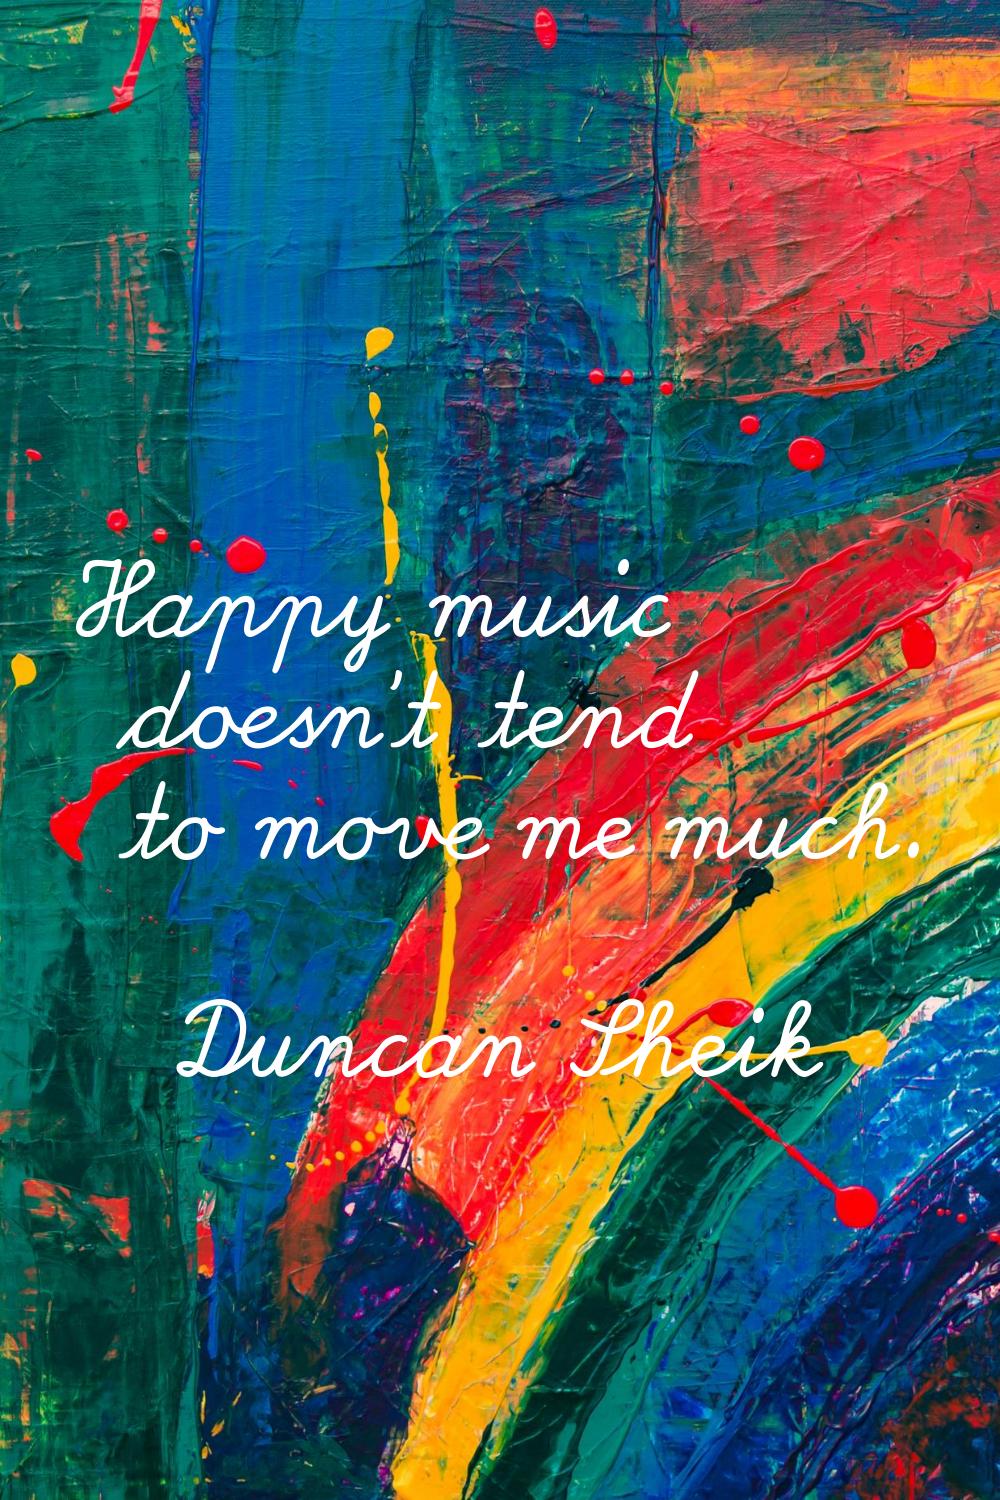 Happy music doesn't tend to move me much.